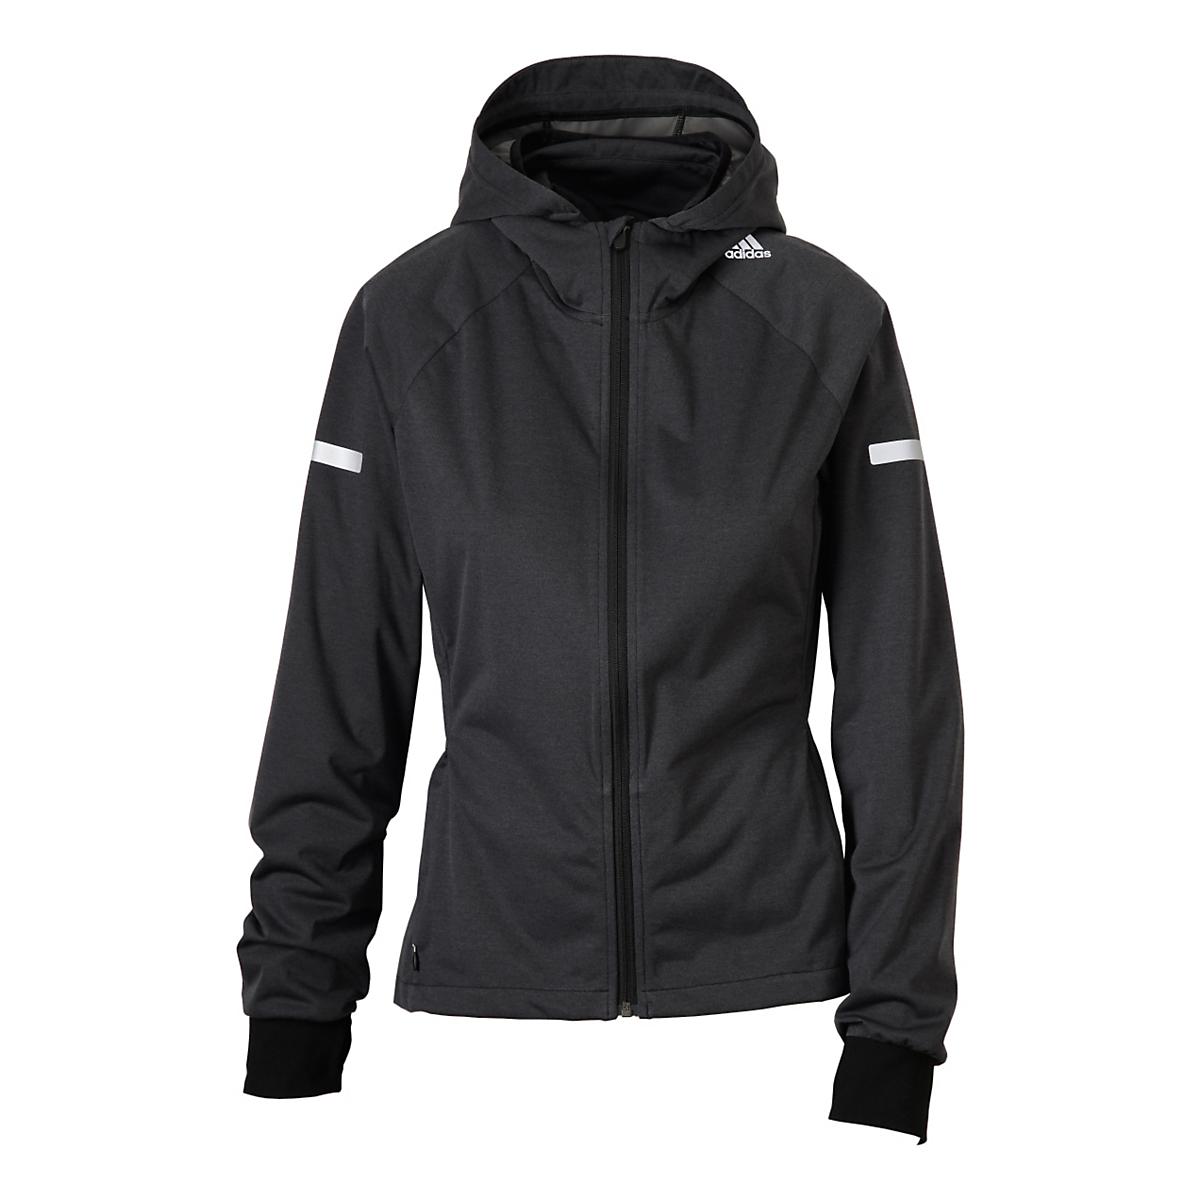 Womens adidas Sequencials Hooded Climaproof Running Jackets at Road ...